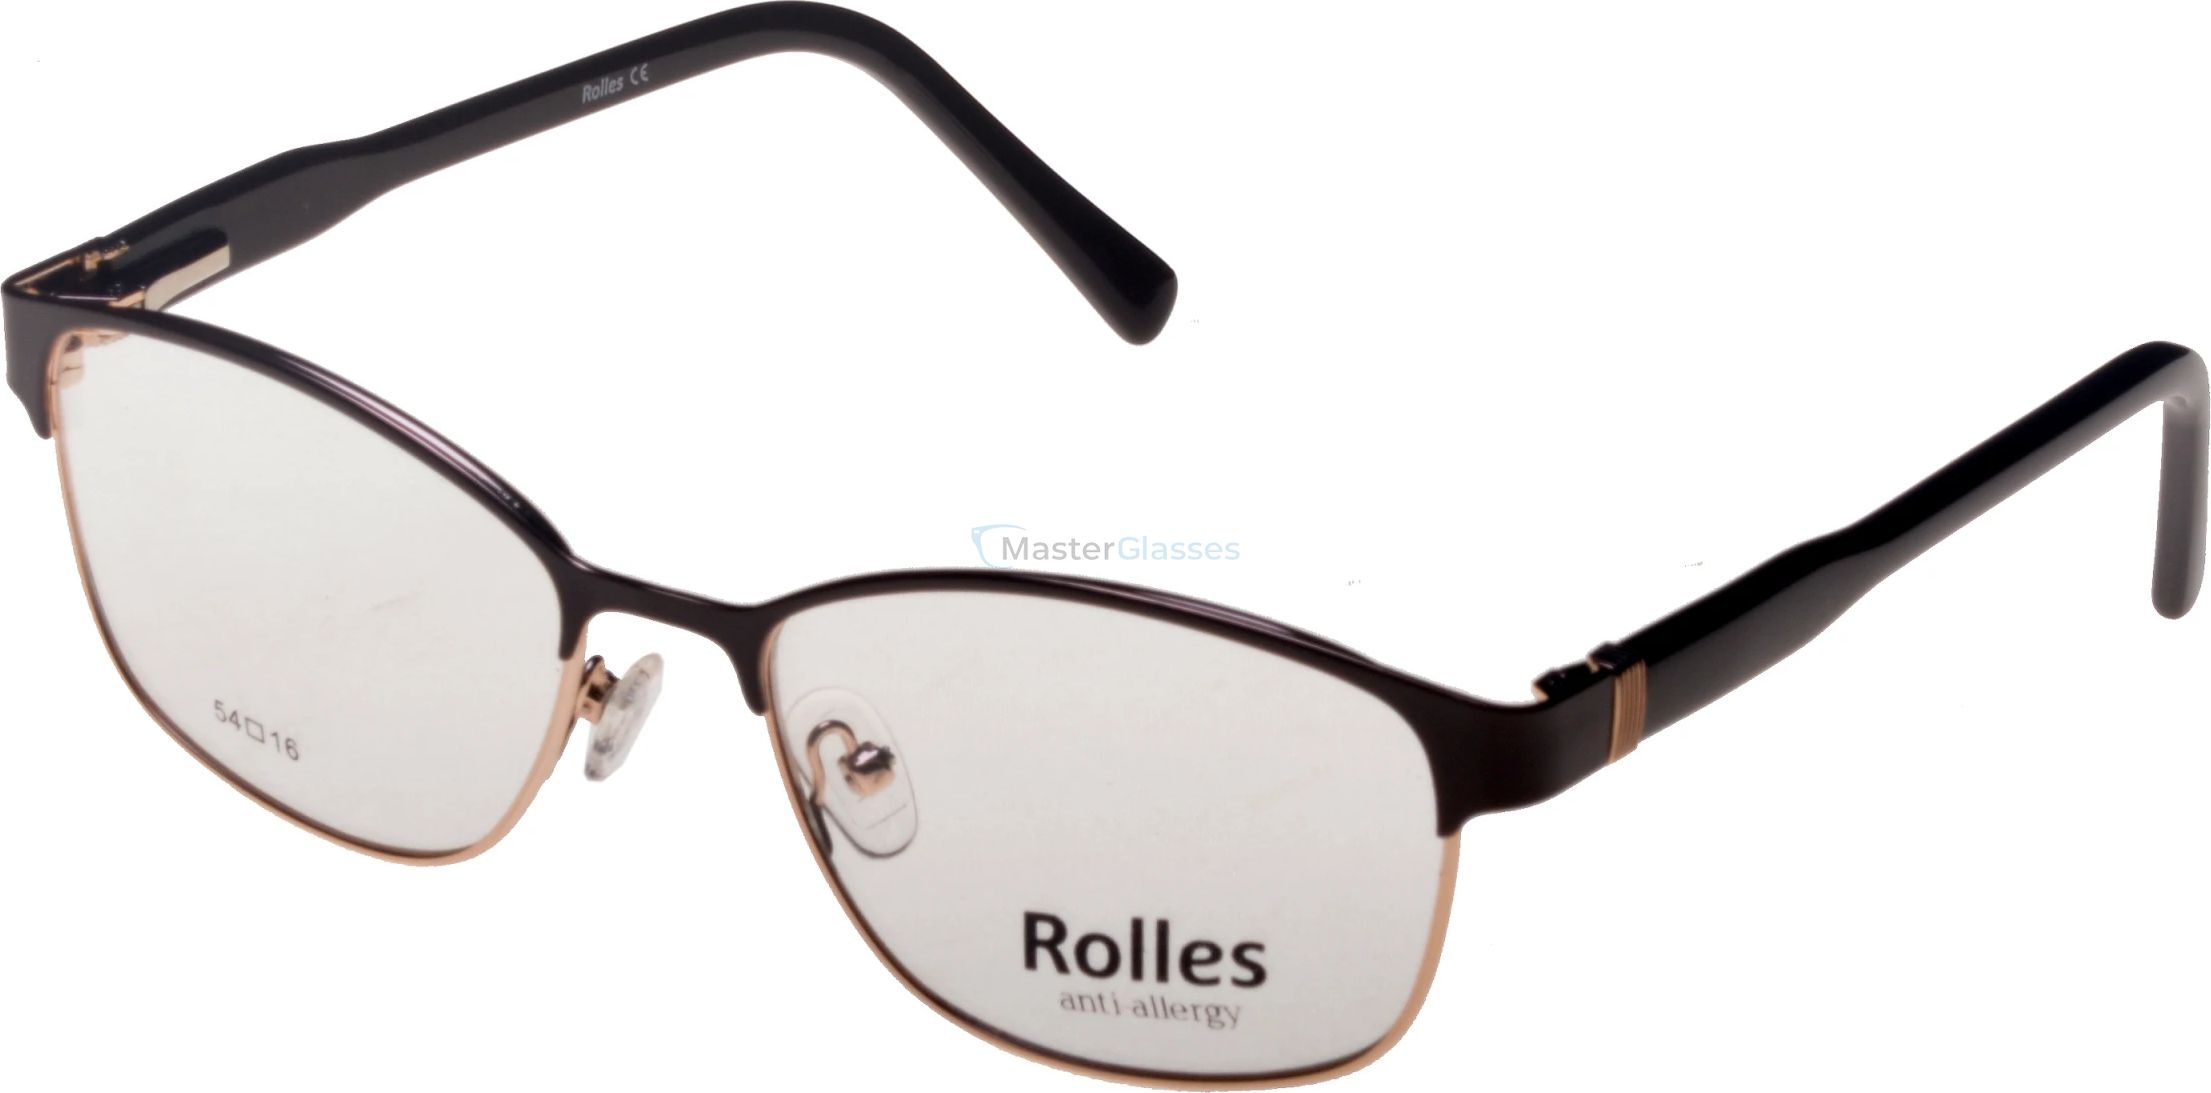  Rolles 718 02